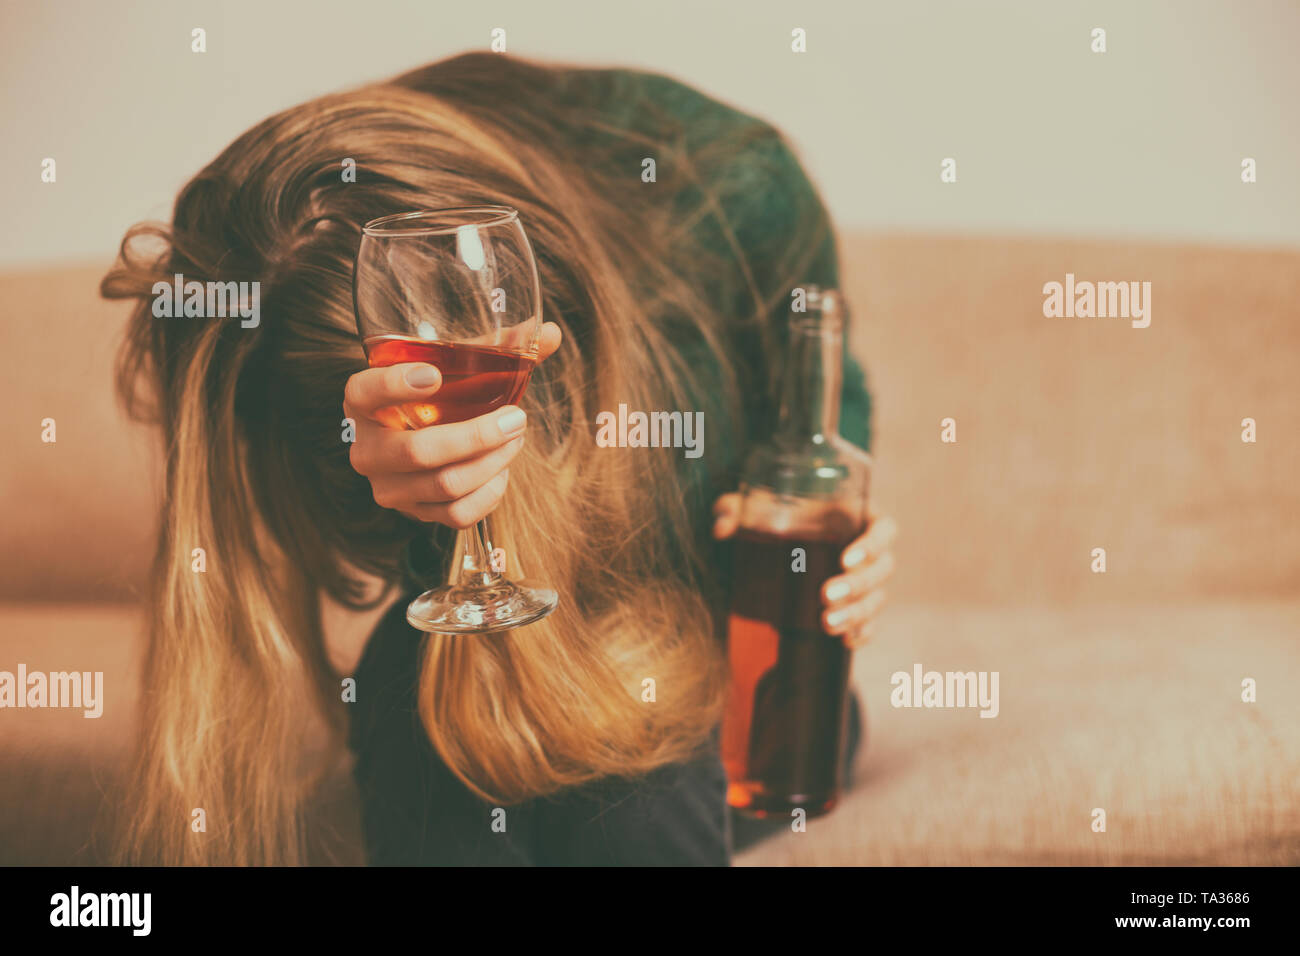 Depressed woman drinking alcohol while sitting alone at sofa.Toned image. Stock Photo